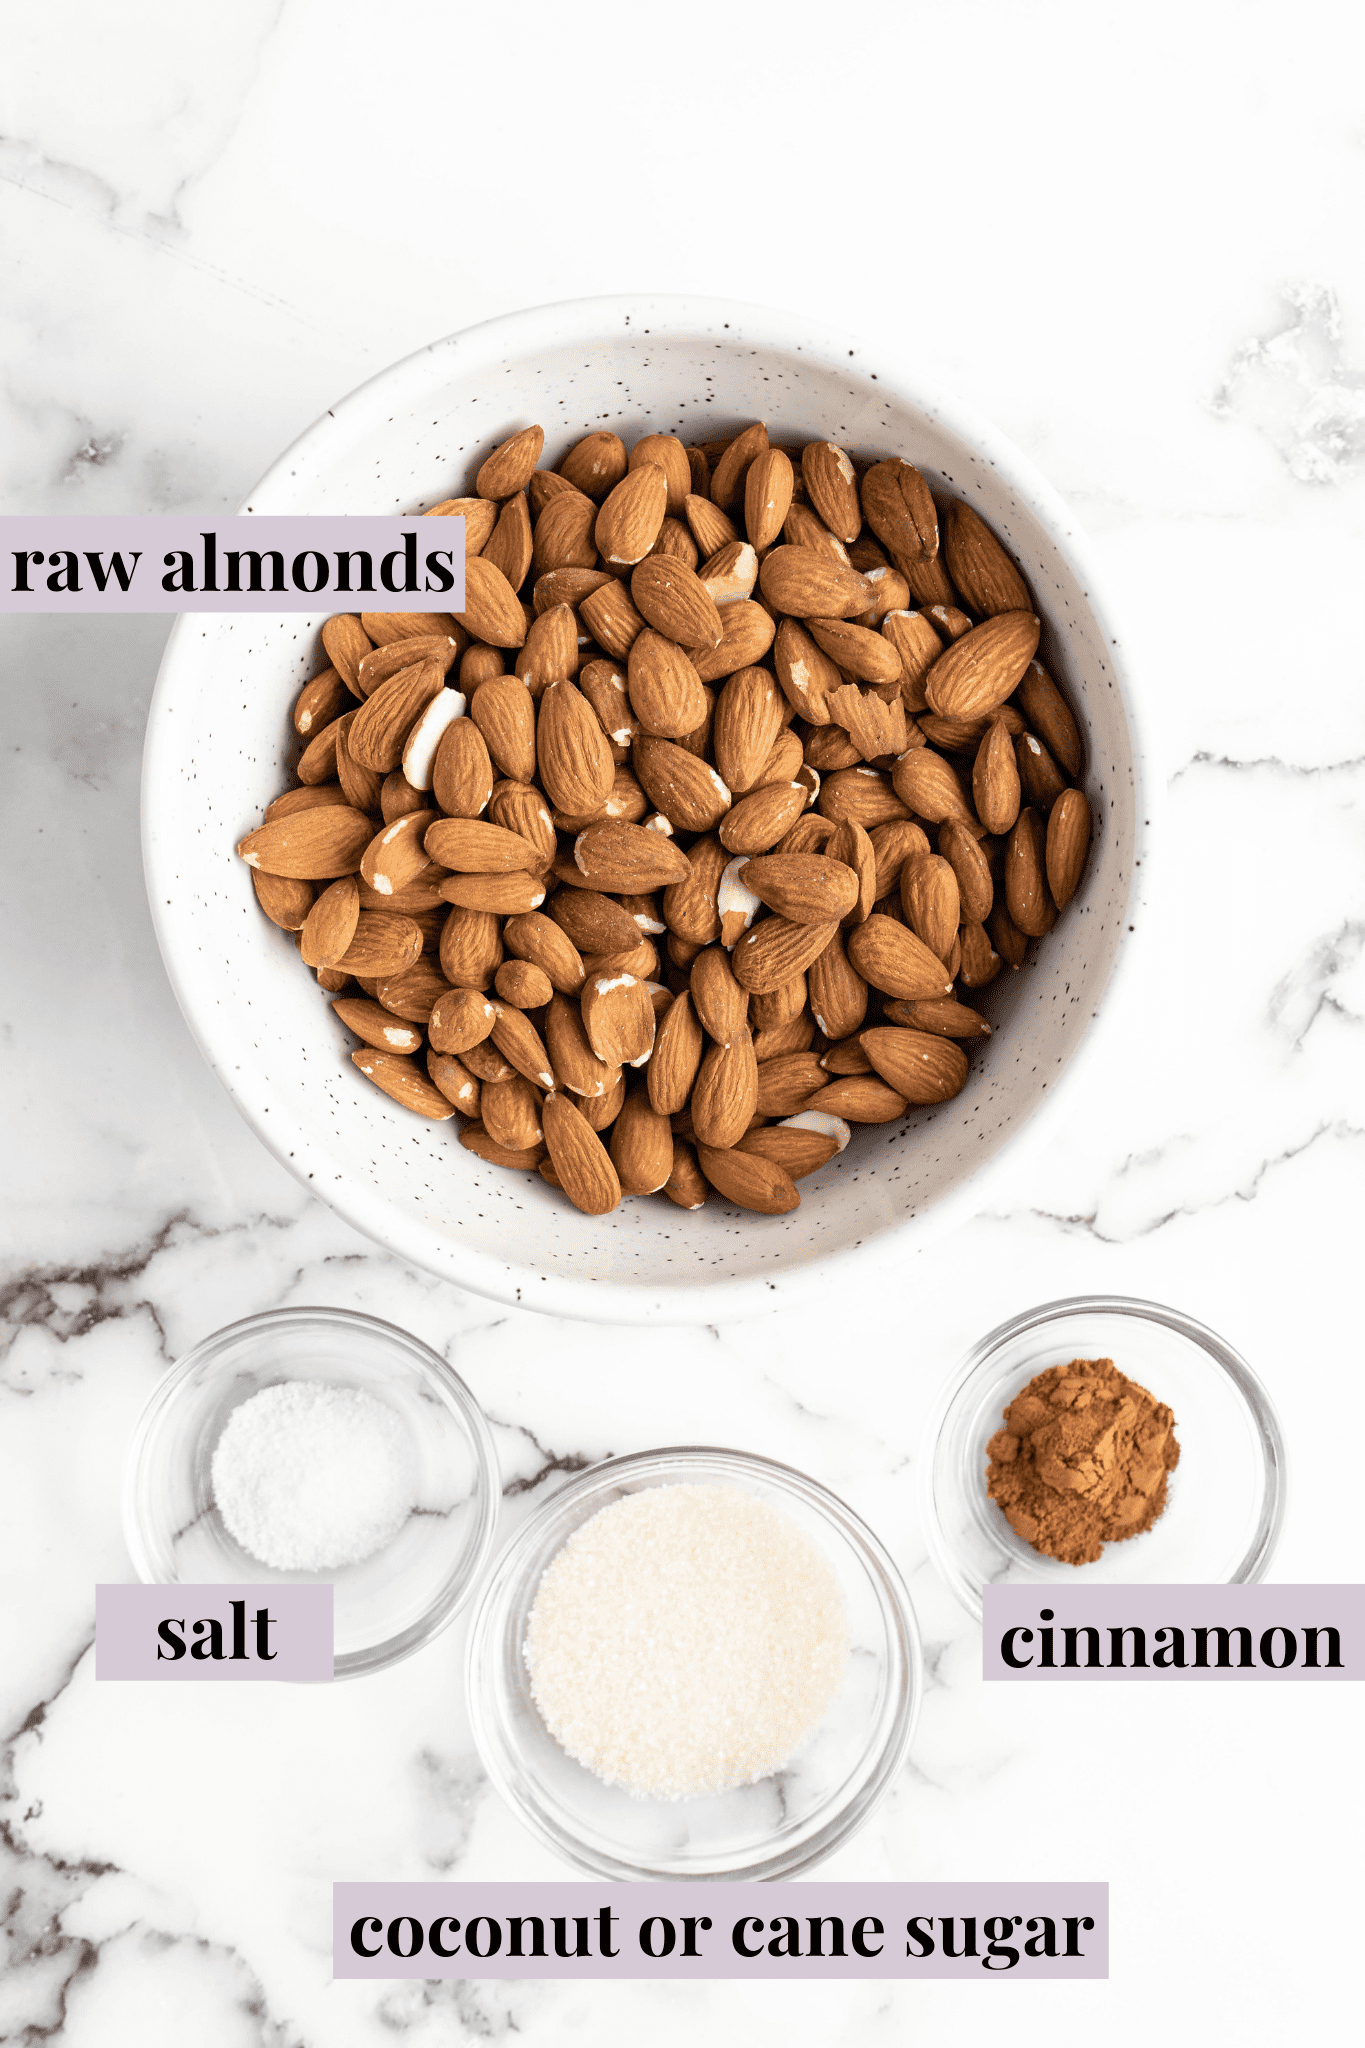 Overhead view of ingredients for almond butter